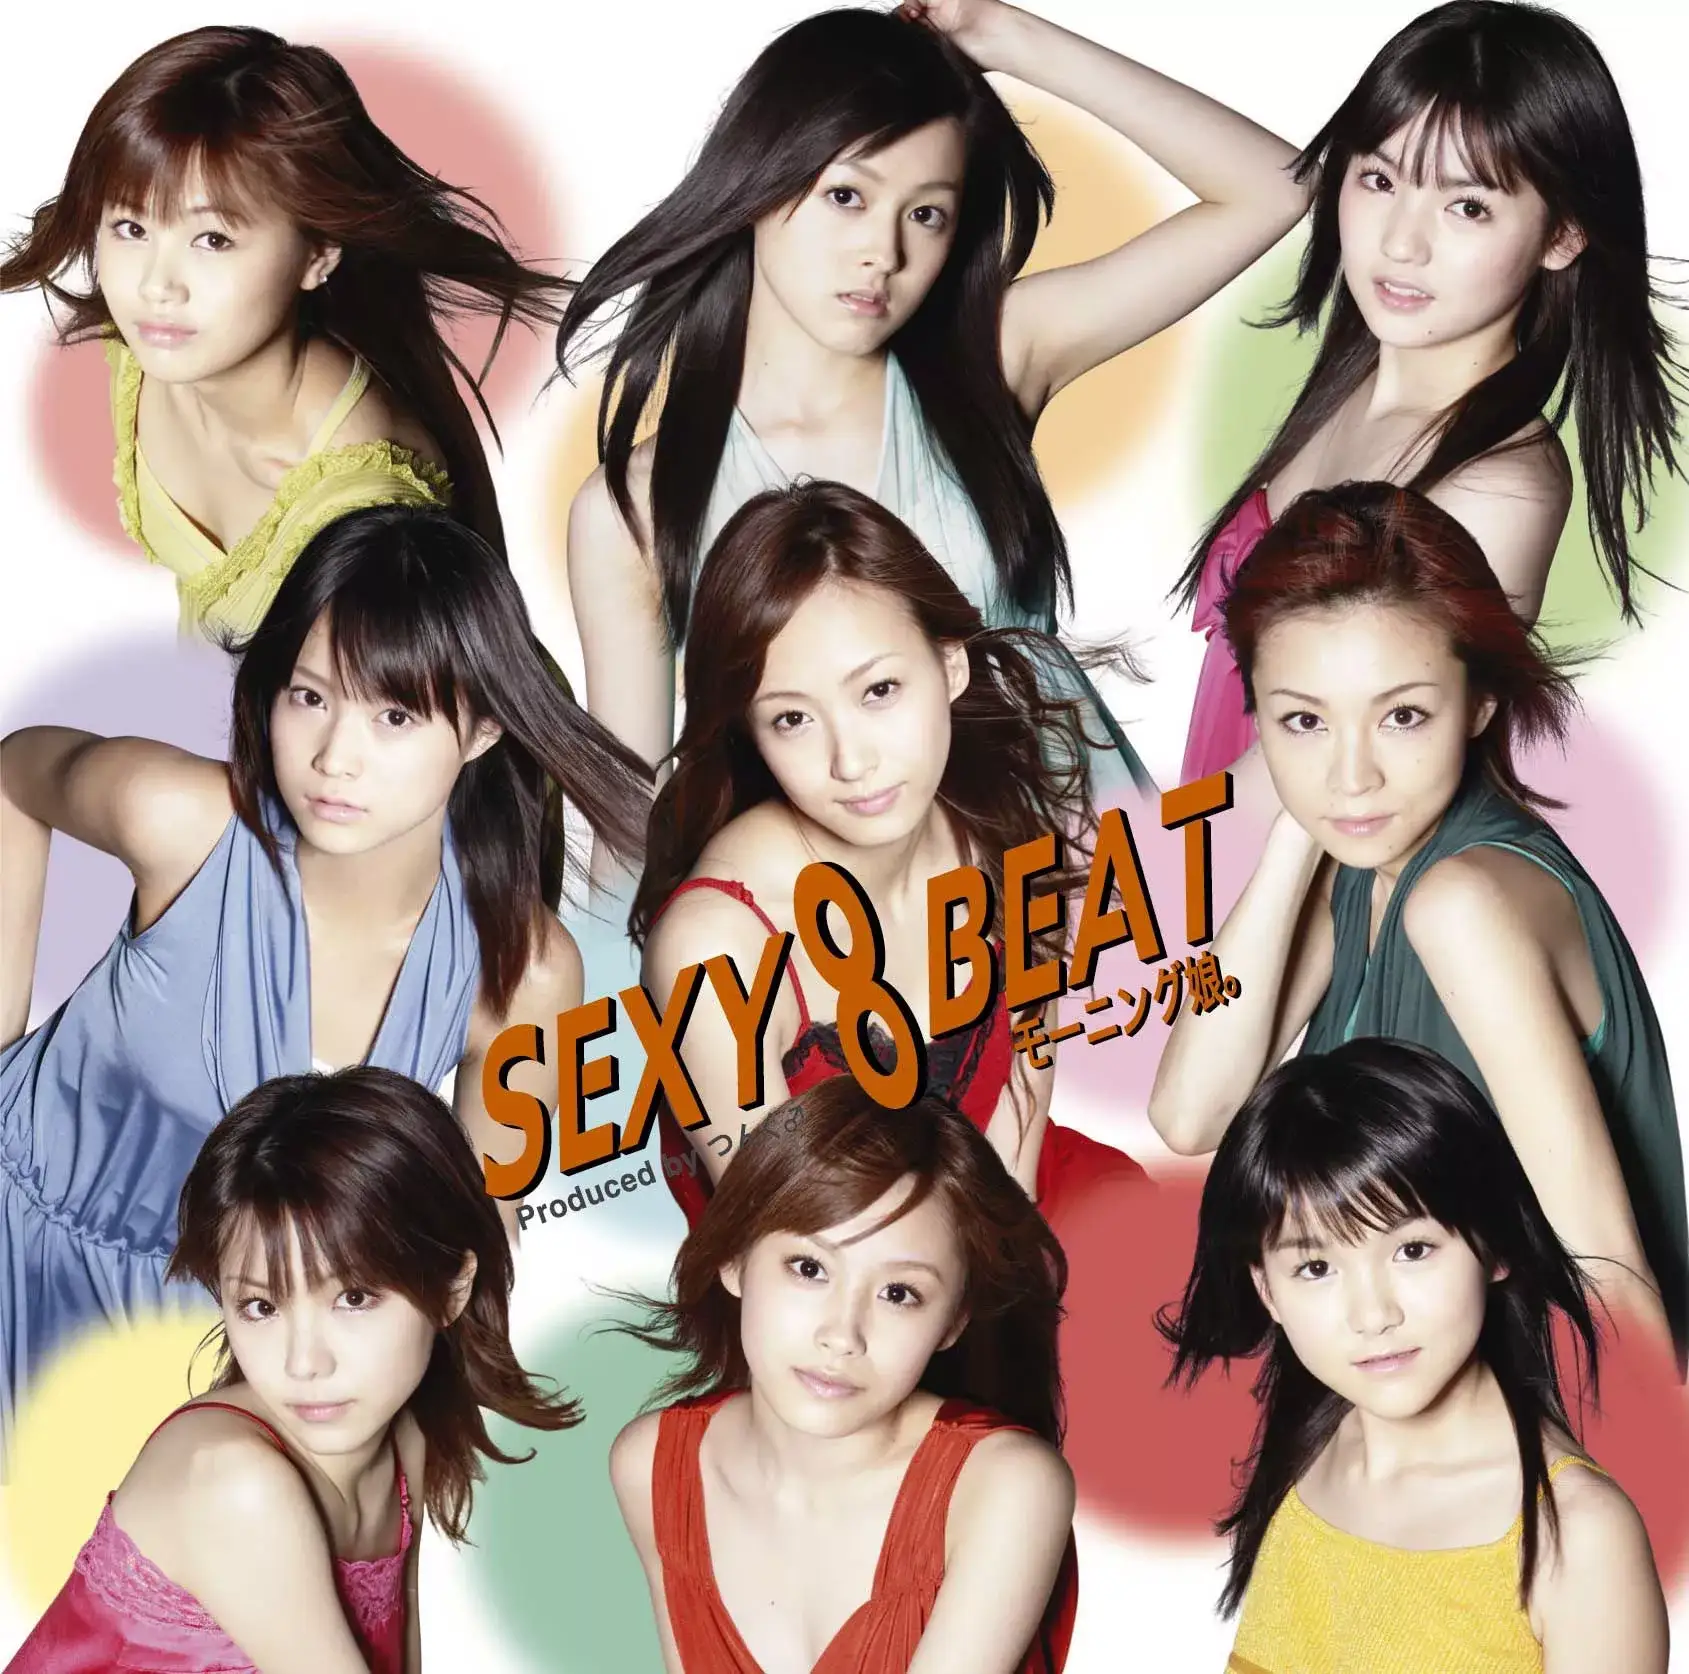 Morning Musume — SEXY 8 BEAT cover artwork